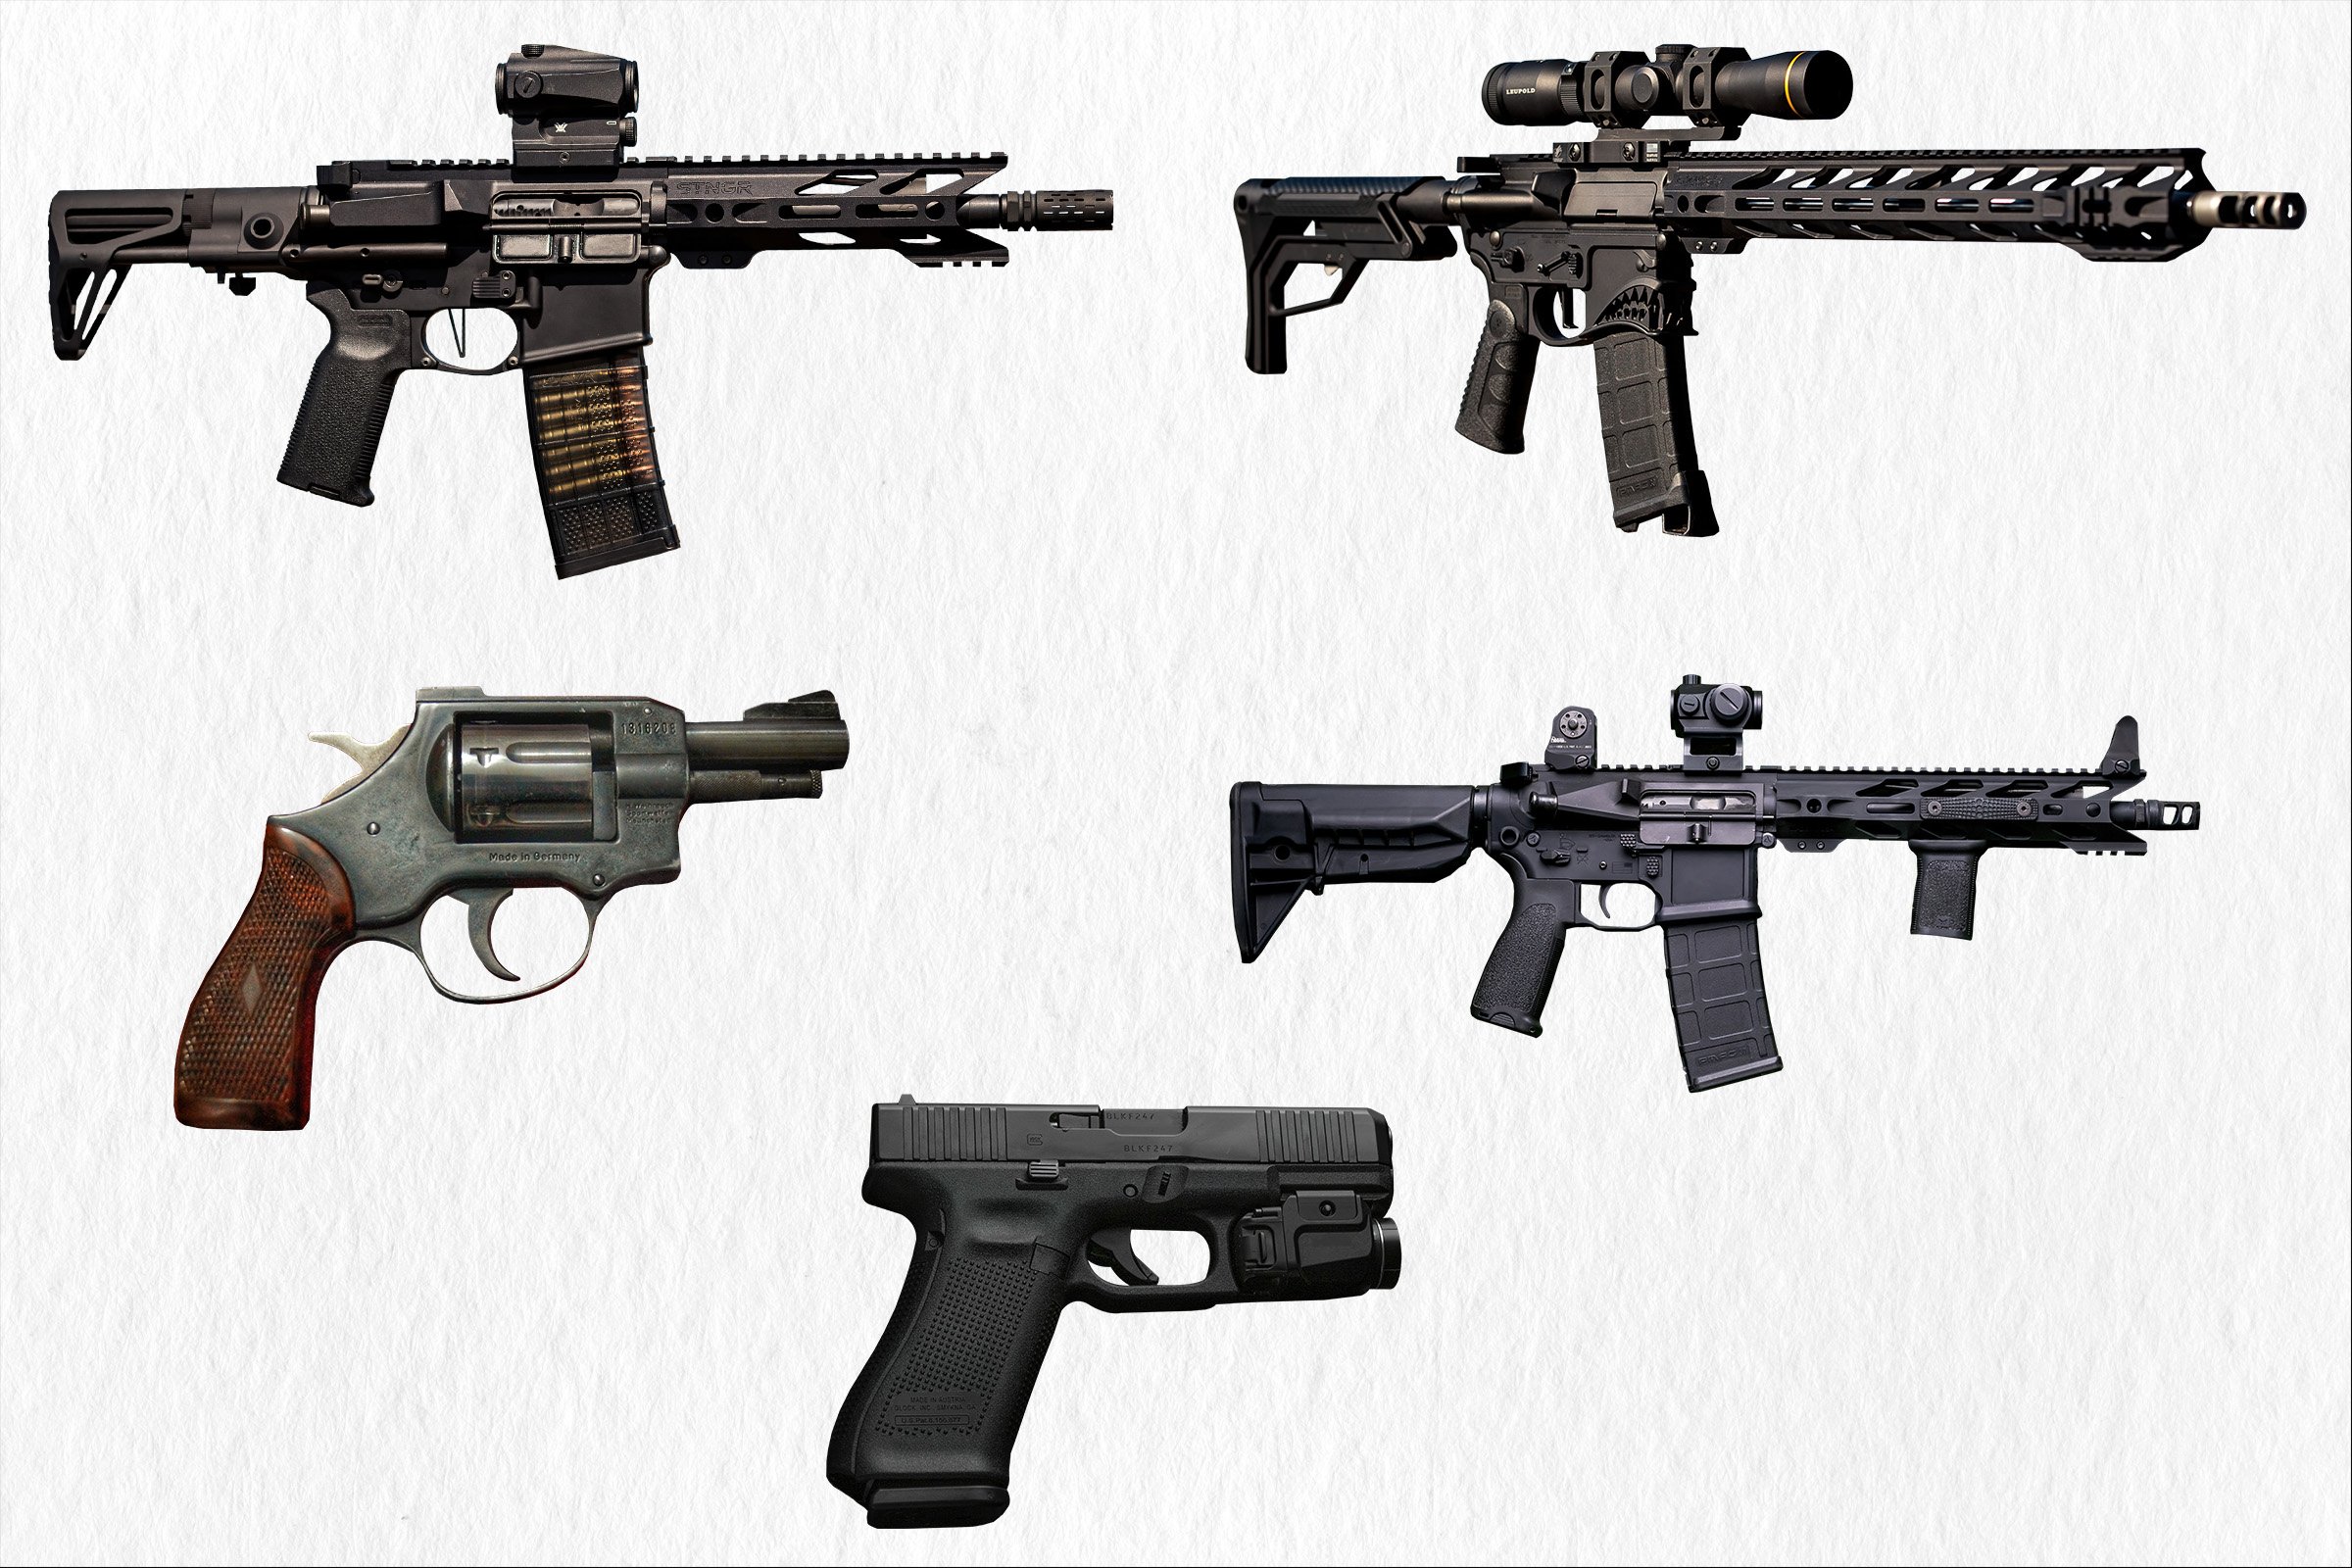 Gun Weapons Images preview image.